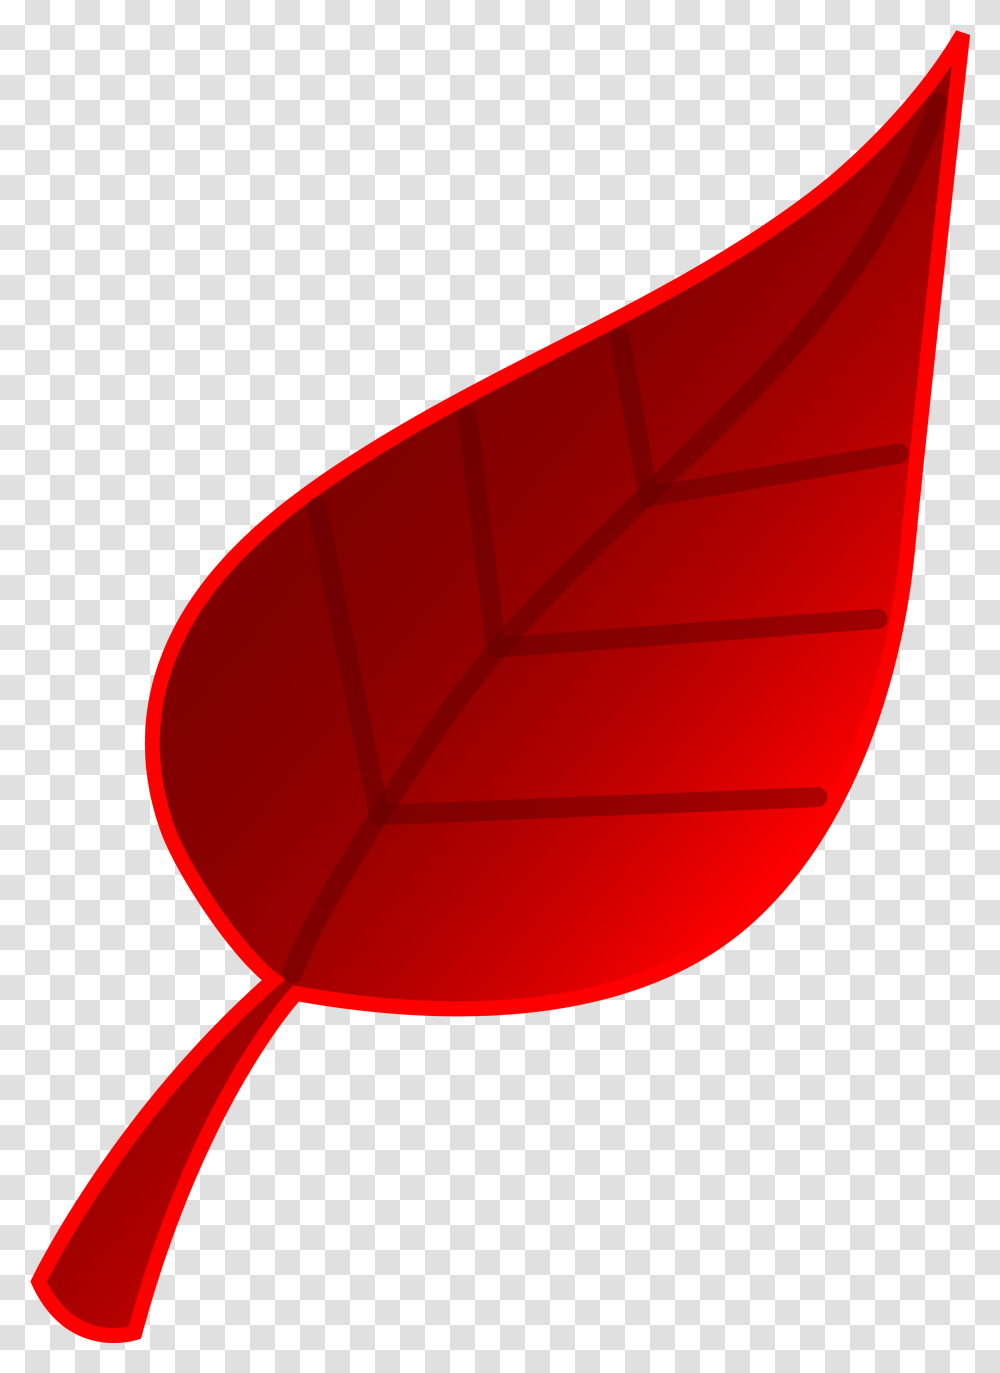 Download Red Fall Leaves Image Clipart Free Red Leaf Clip Art, Plant, Veins, Maroon, Balloon Transparent Png